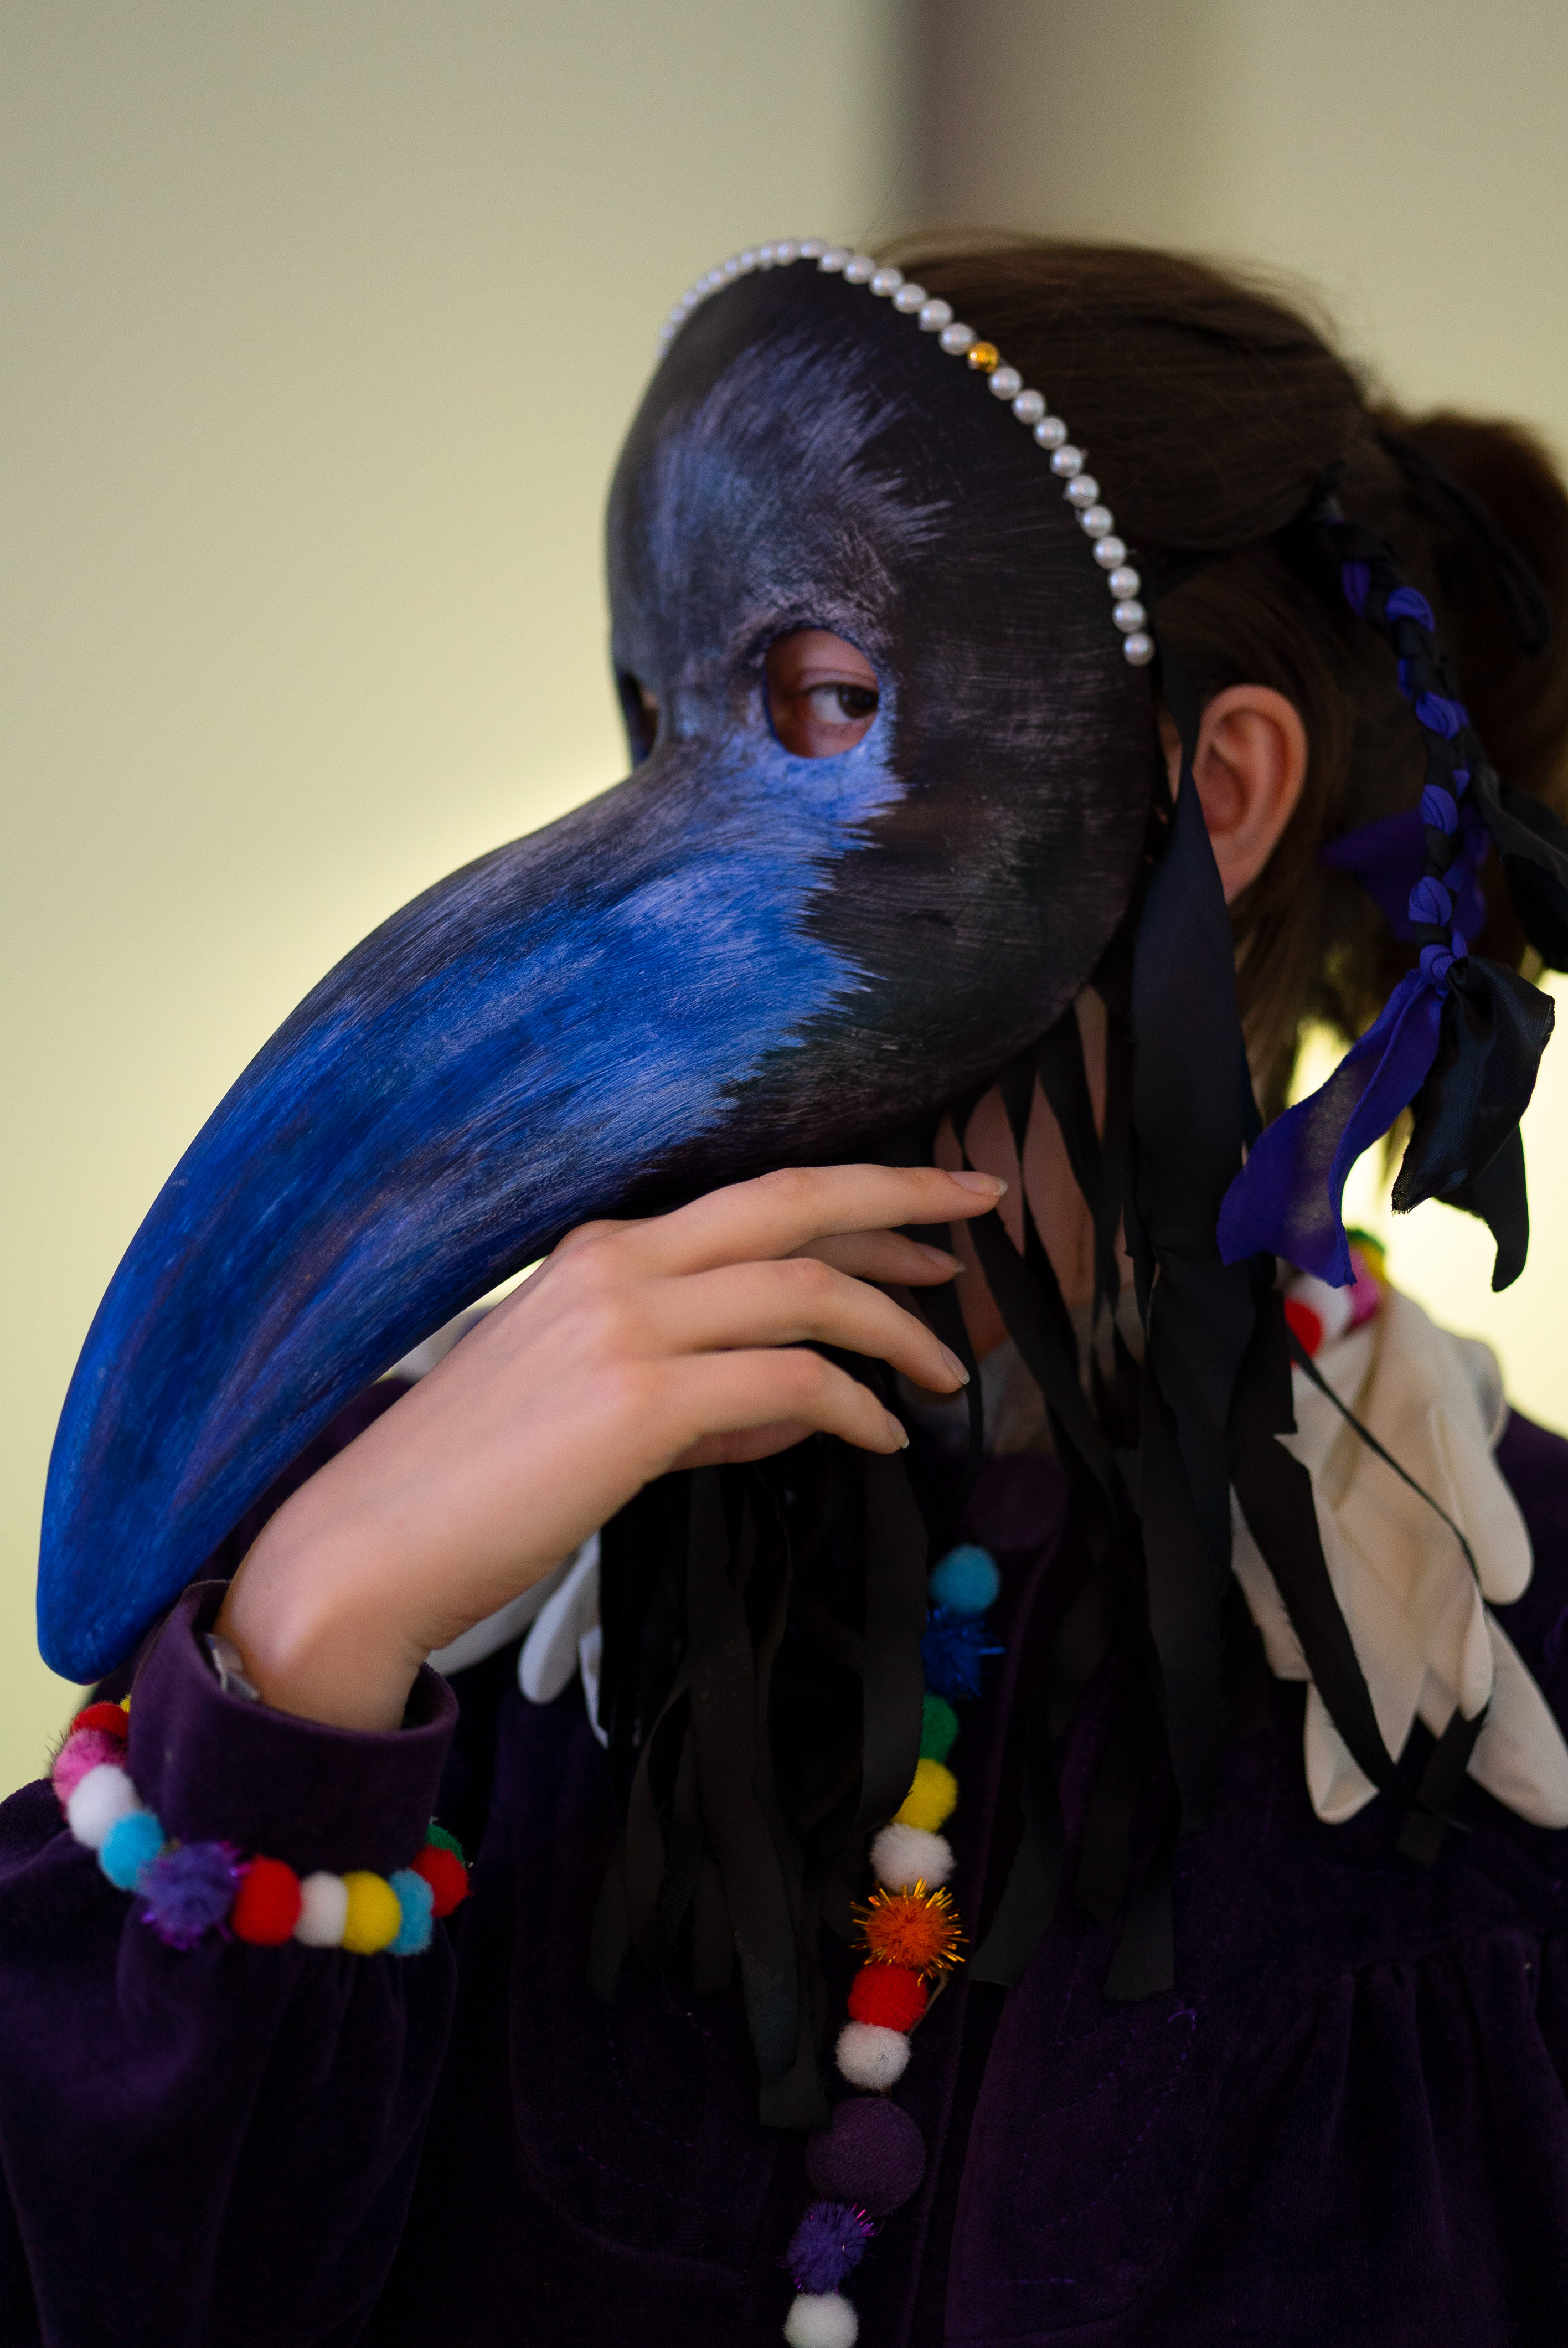 The photo is a close-up of a side profile of a person wearing a plague doctor mask. The mask is painted with black and blue paint, the upper edge of the mask is decorated with white pearls. The person is wearing a purple velvet coat decorated with colorful fabric balls on the cuffs and button closures. They hold their right hand under the beak of the mask. The eye visible under the mask looks directly into the camera.